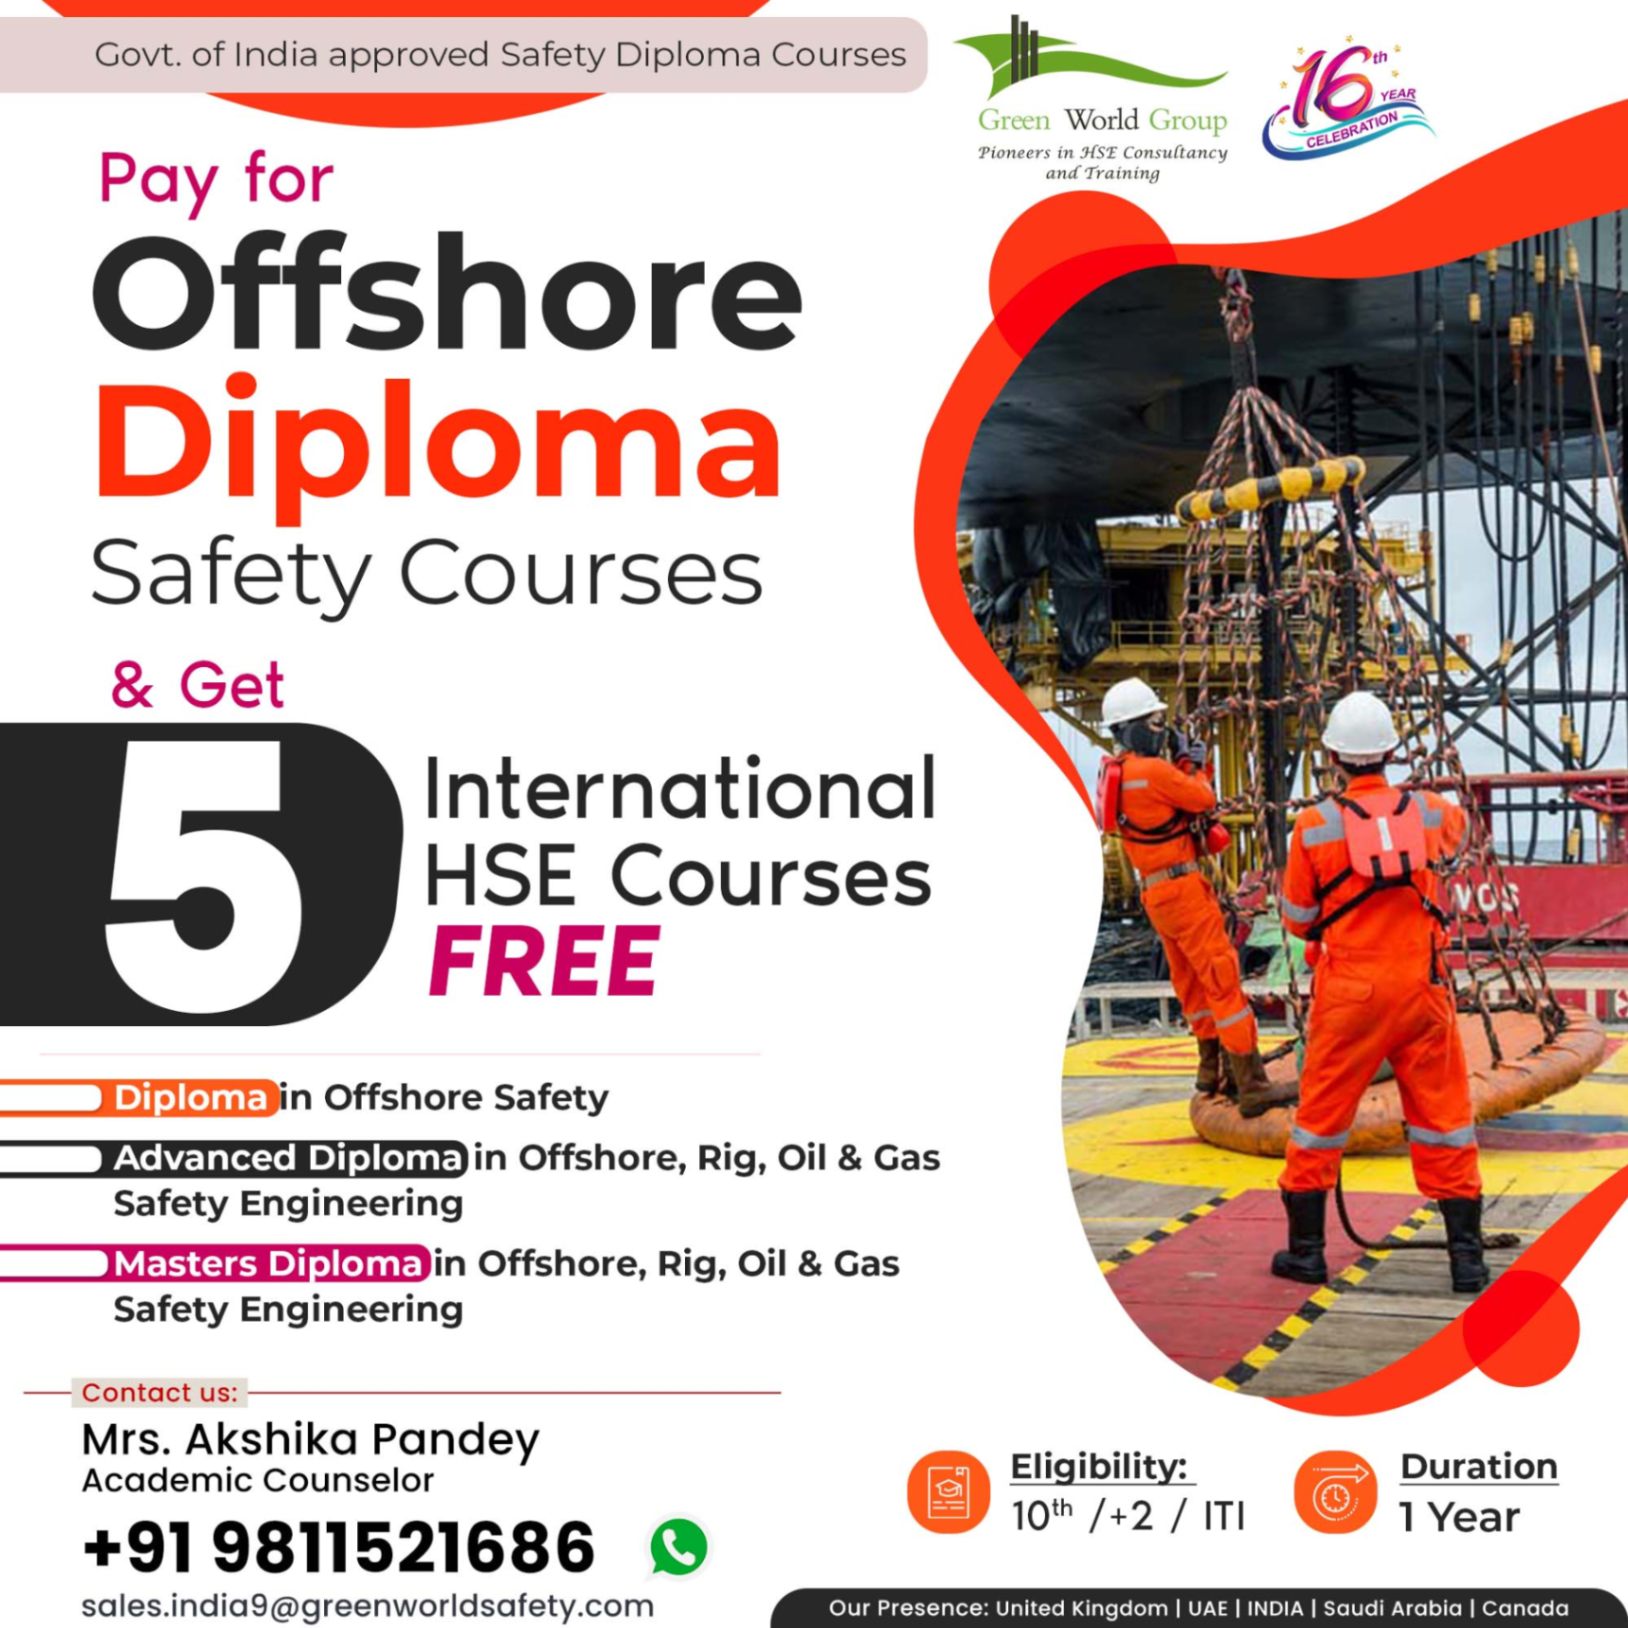 Pay for Offshore Diploma Course & Get 5 Intl HSE Course FREE